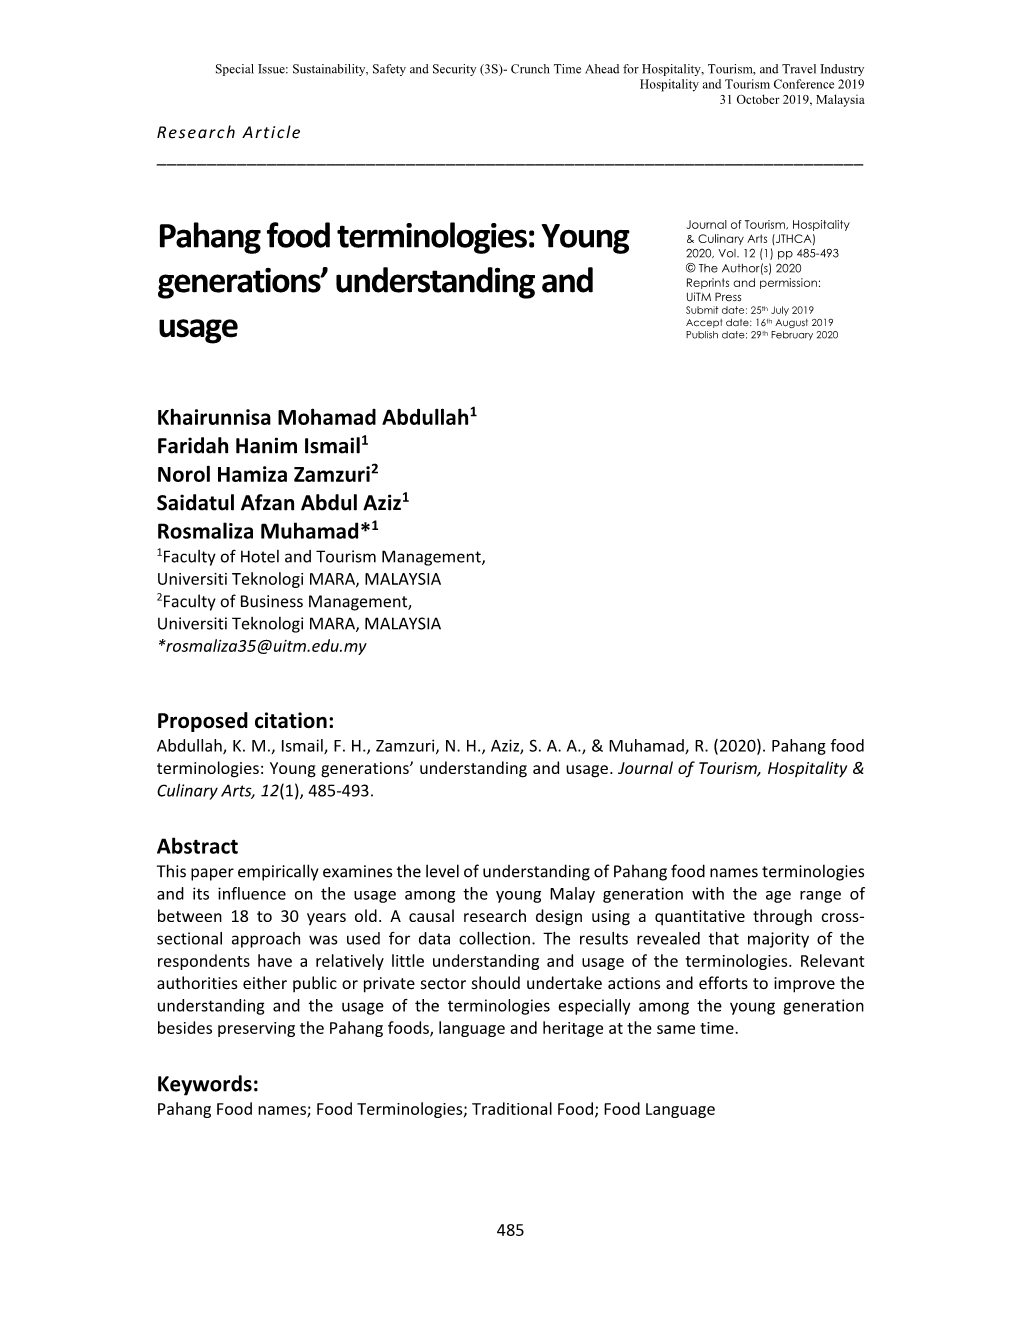 Pahang Food Terminologies: Young Generations' Understanding And